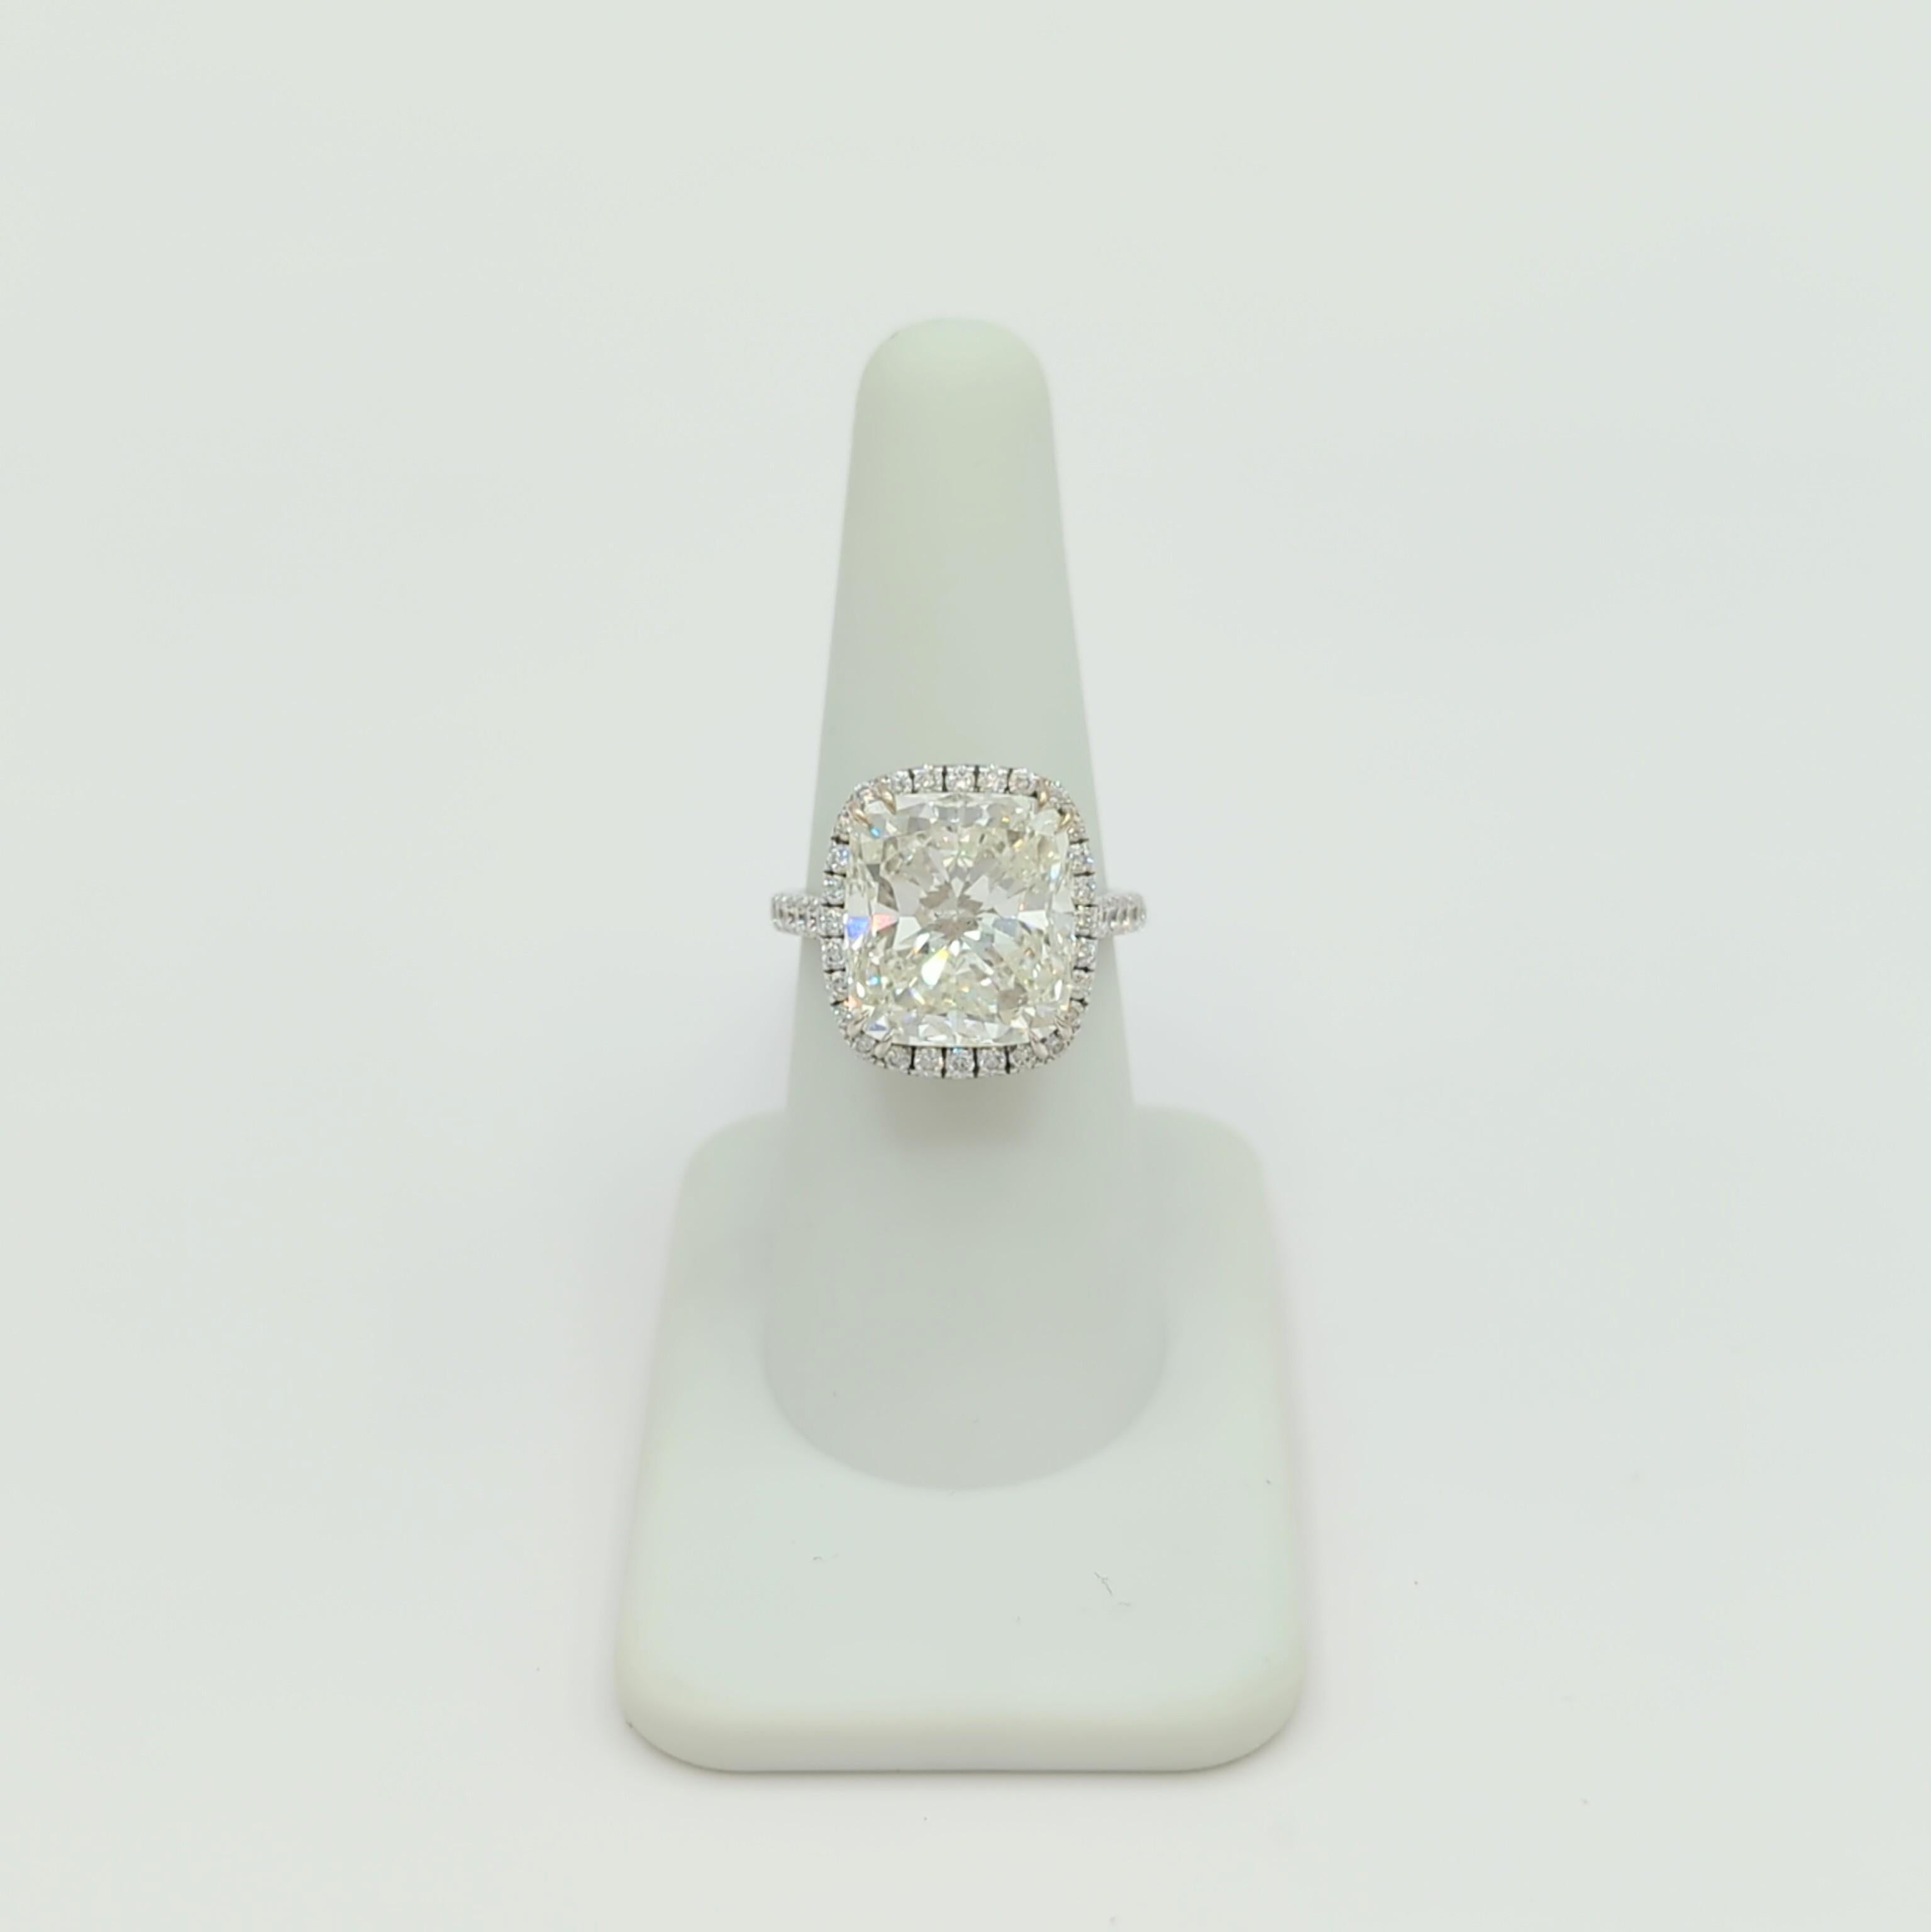 GIA 9.01 ct. K SI2 White Diamond Cushion Solitaire Ring in 18K White Gold In New Condition For Sale In Los Angeles, CA